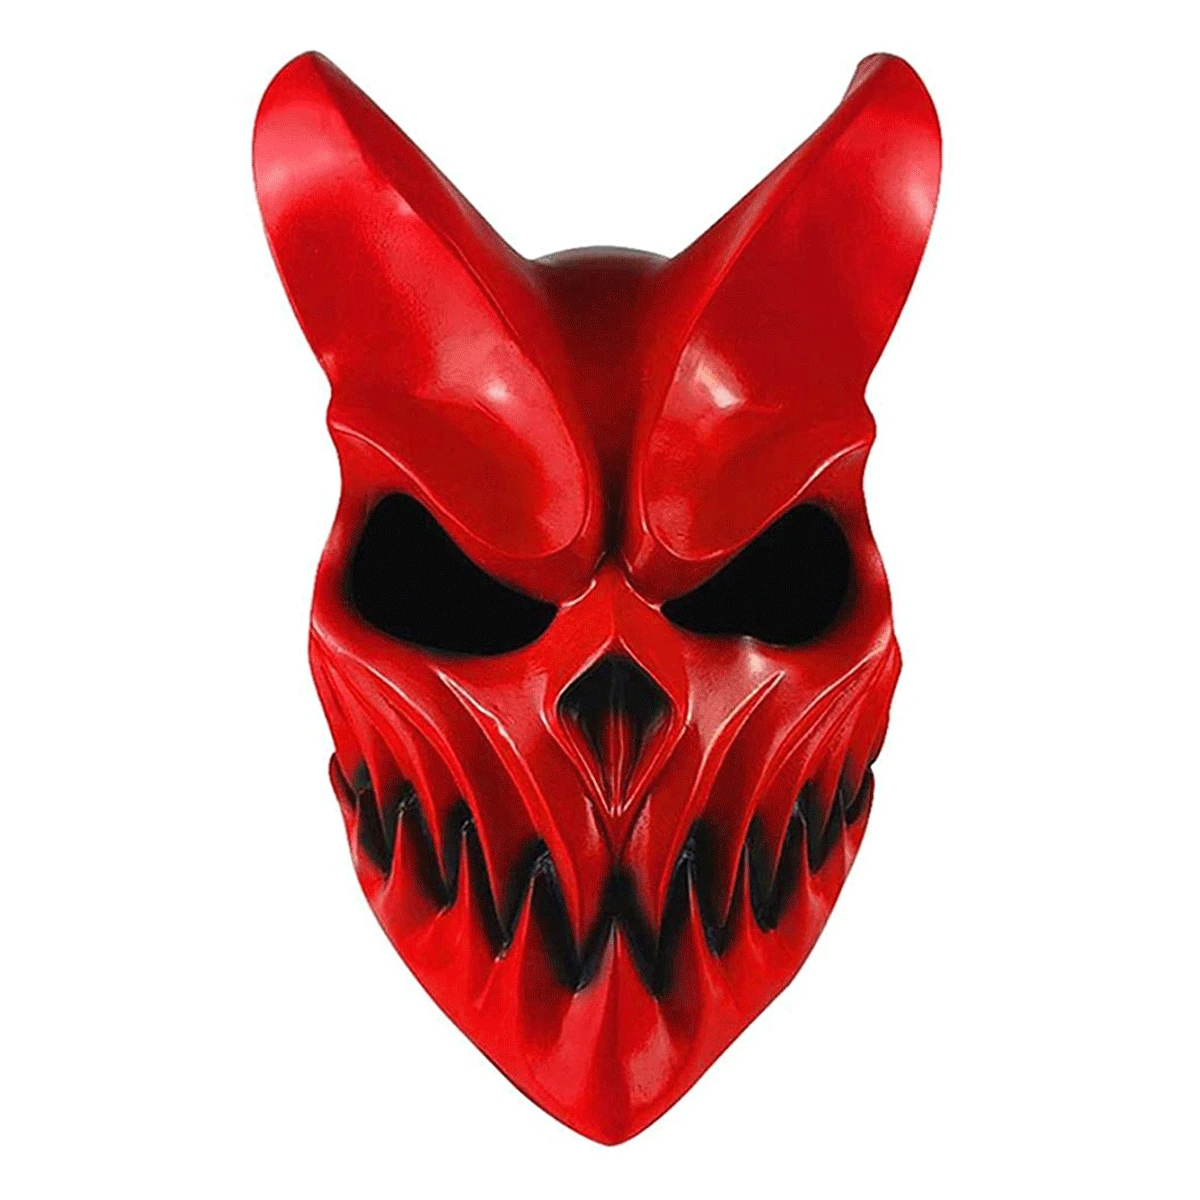 Mask Deadcore Halloween Costume Slaughter To Prevail Kid Of Darkness Demolisher Mask Demon Mask Masquerade Party Prop - Costume Props -